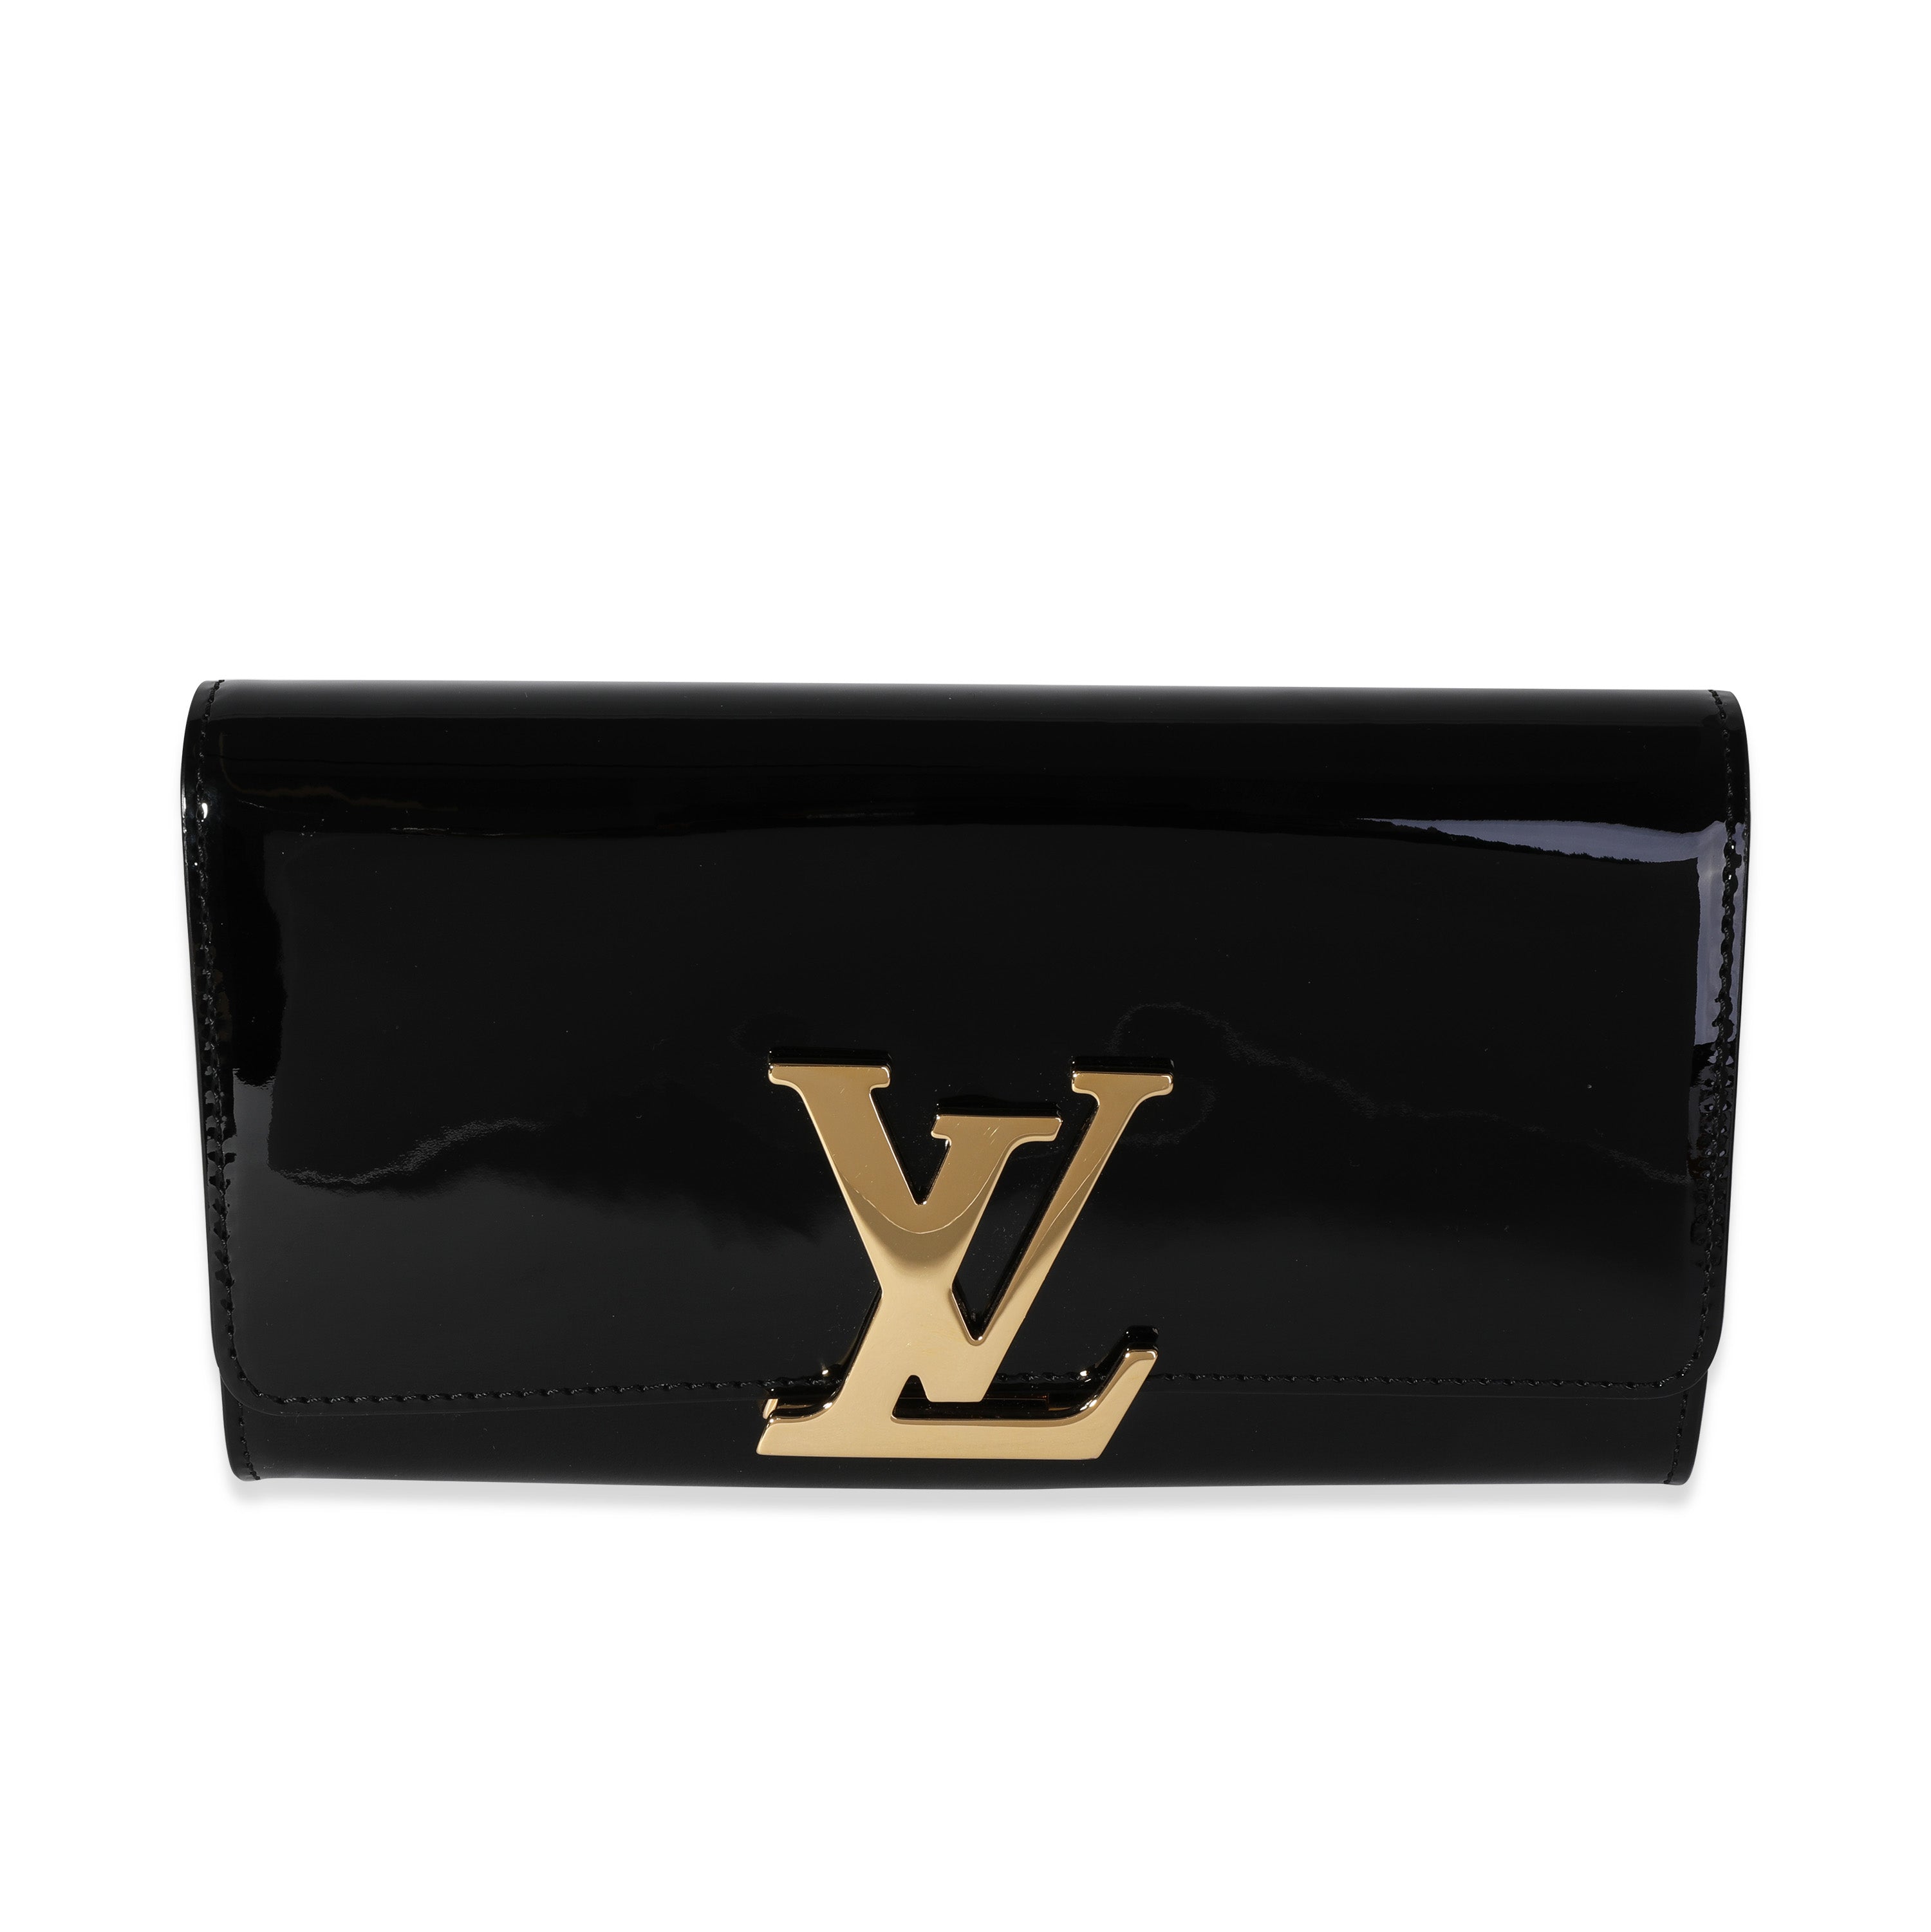 Louis Vuitton Red Vernis Leather Louise Clutch Bag